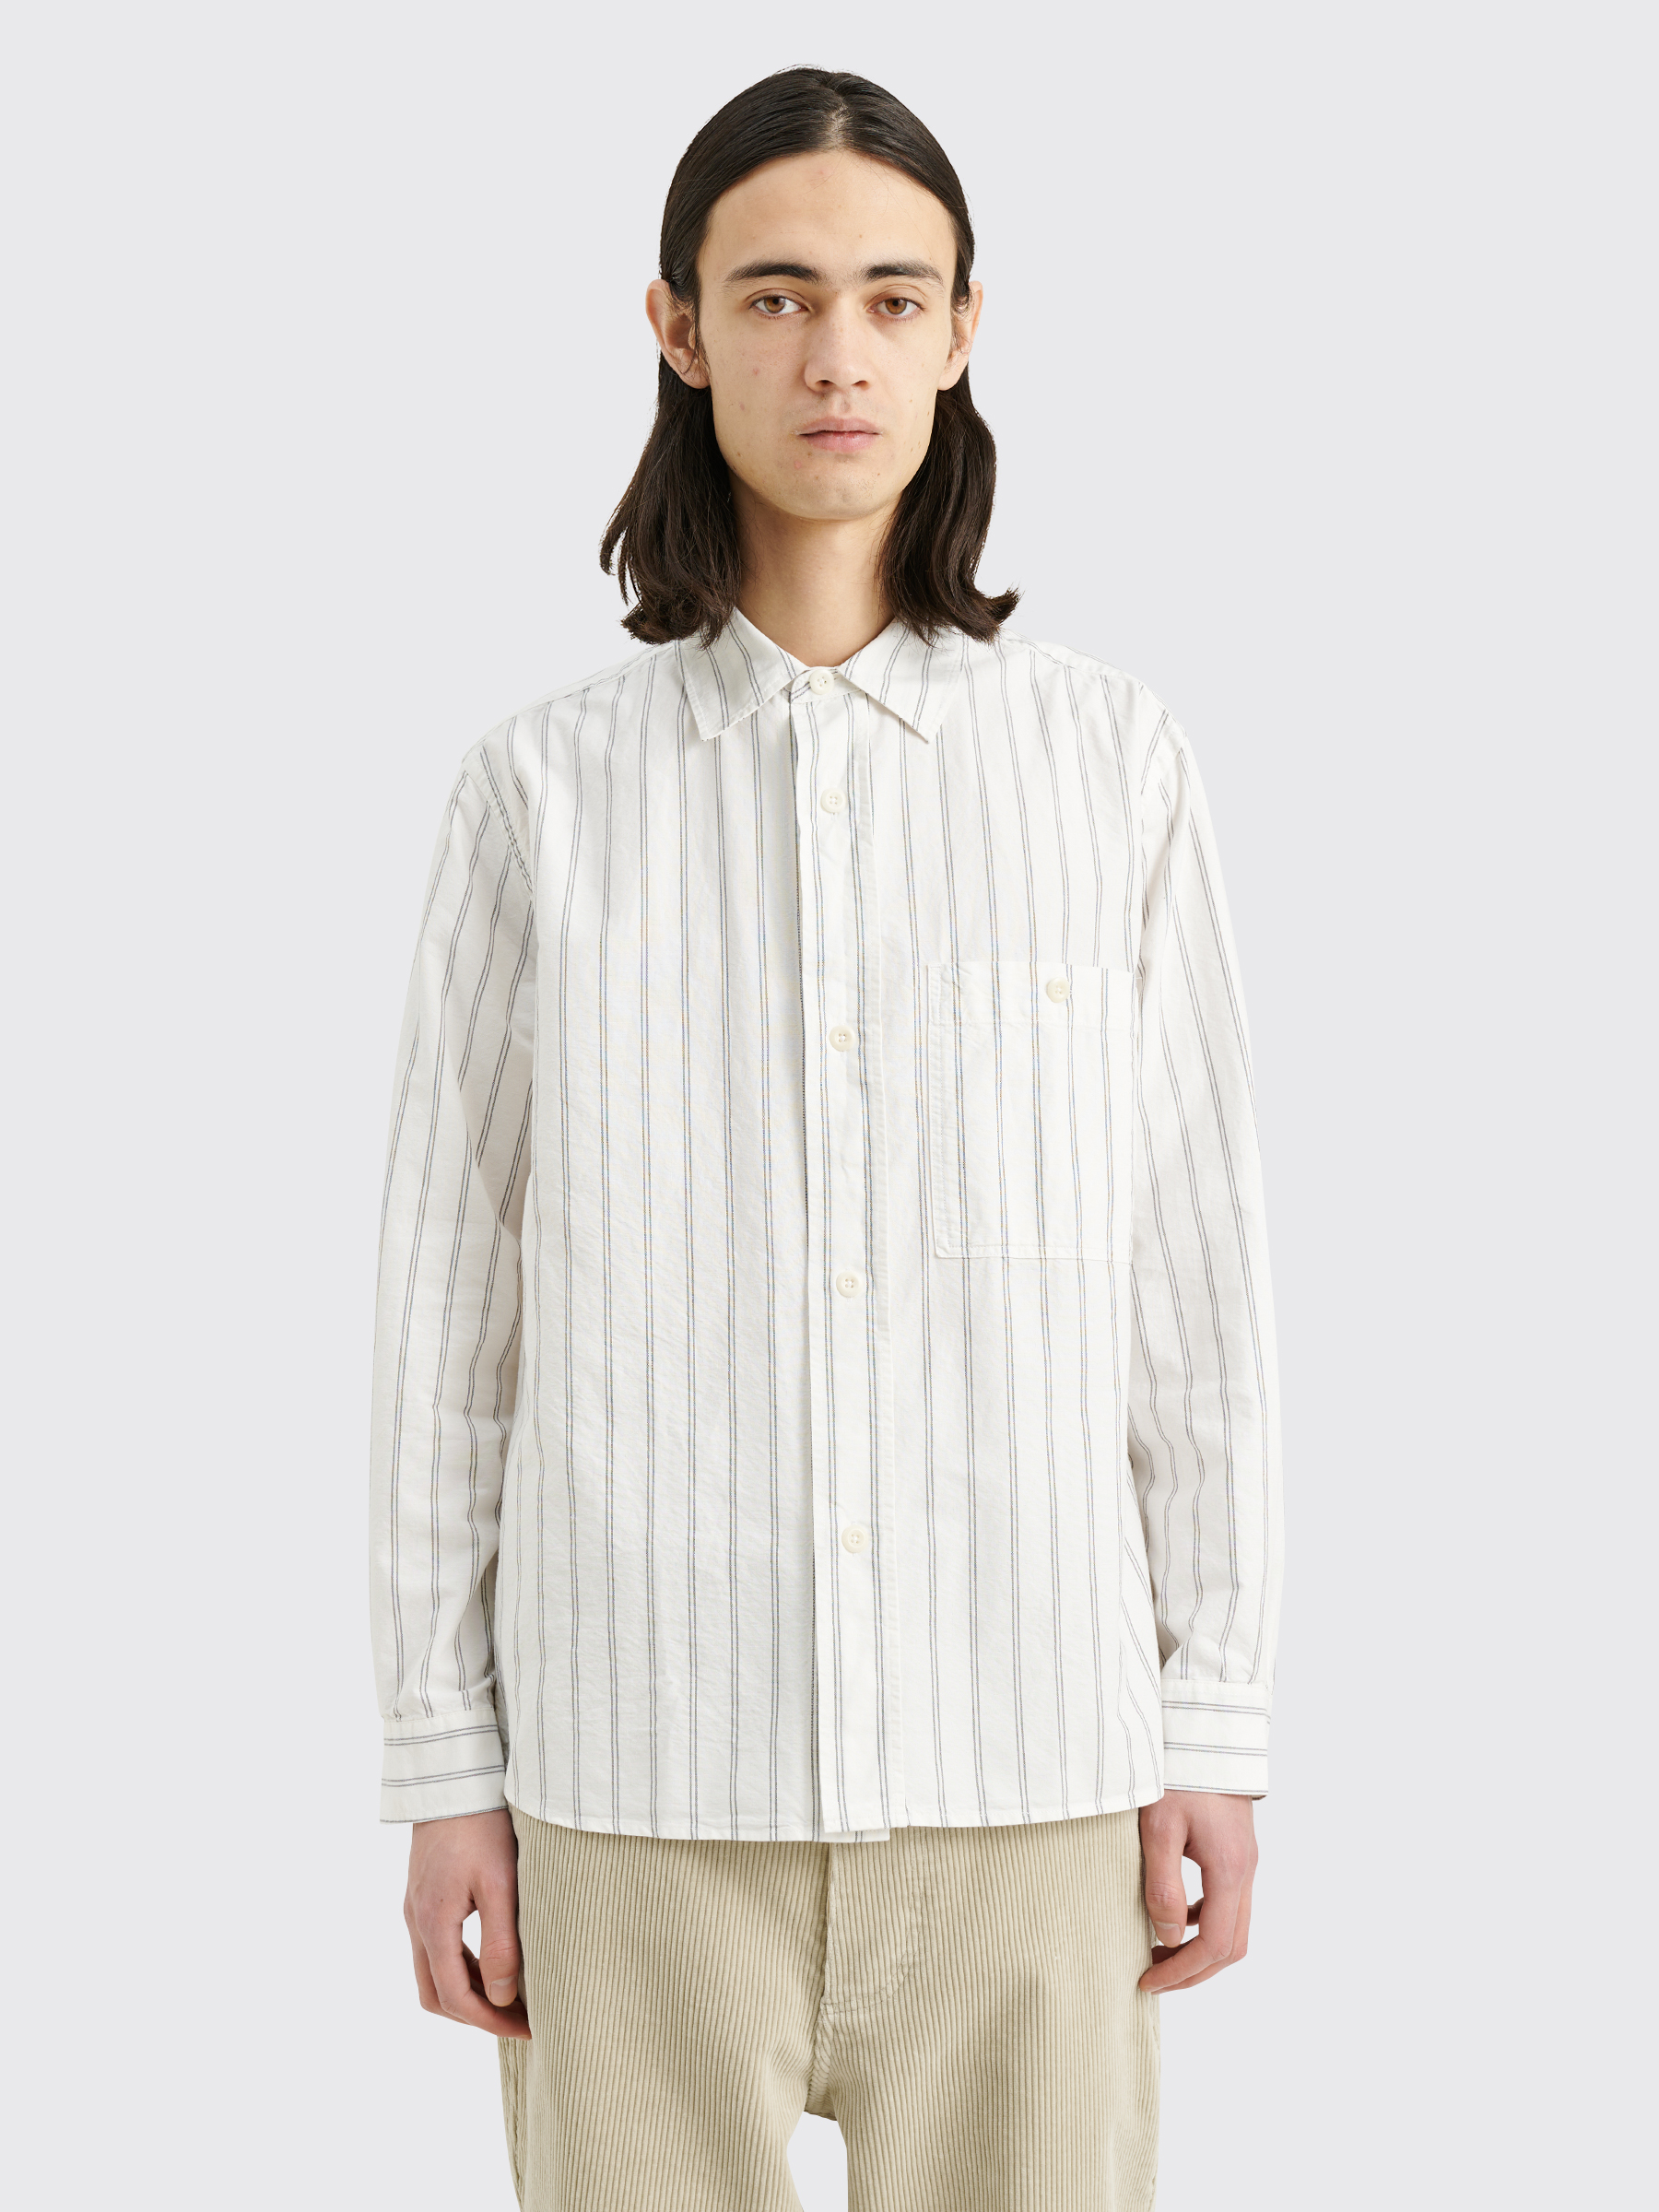 Très Bien - Margaret Howell MHL Overall Shirt Double Stripe Off 